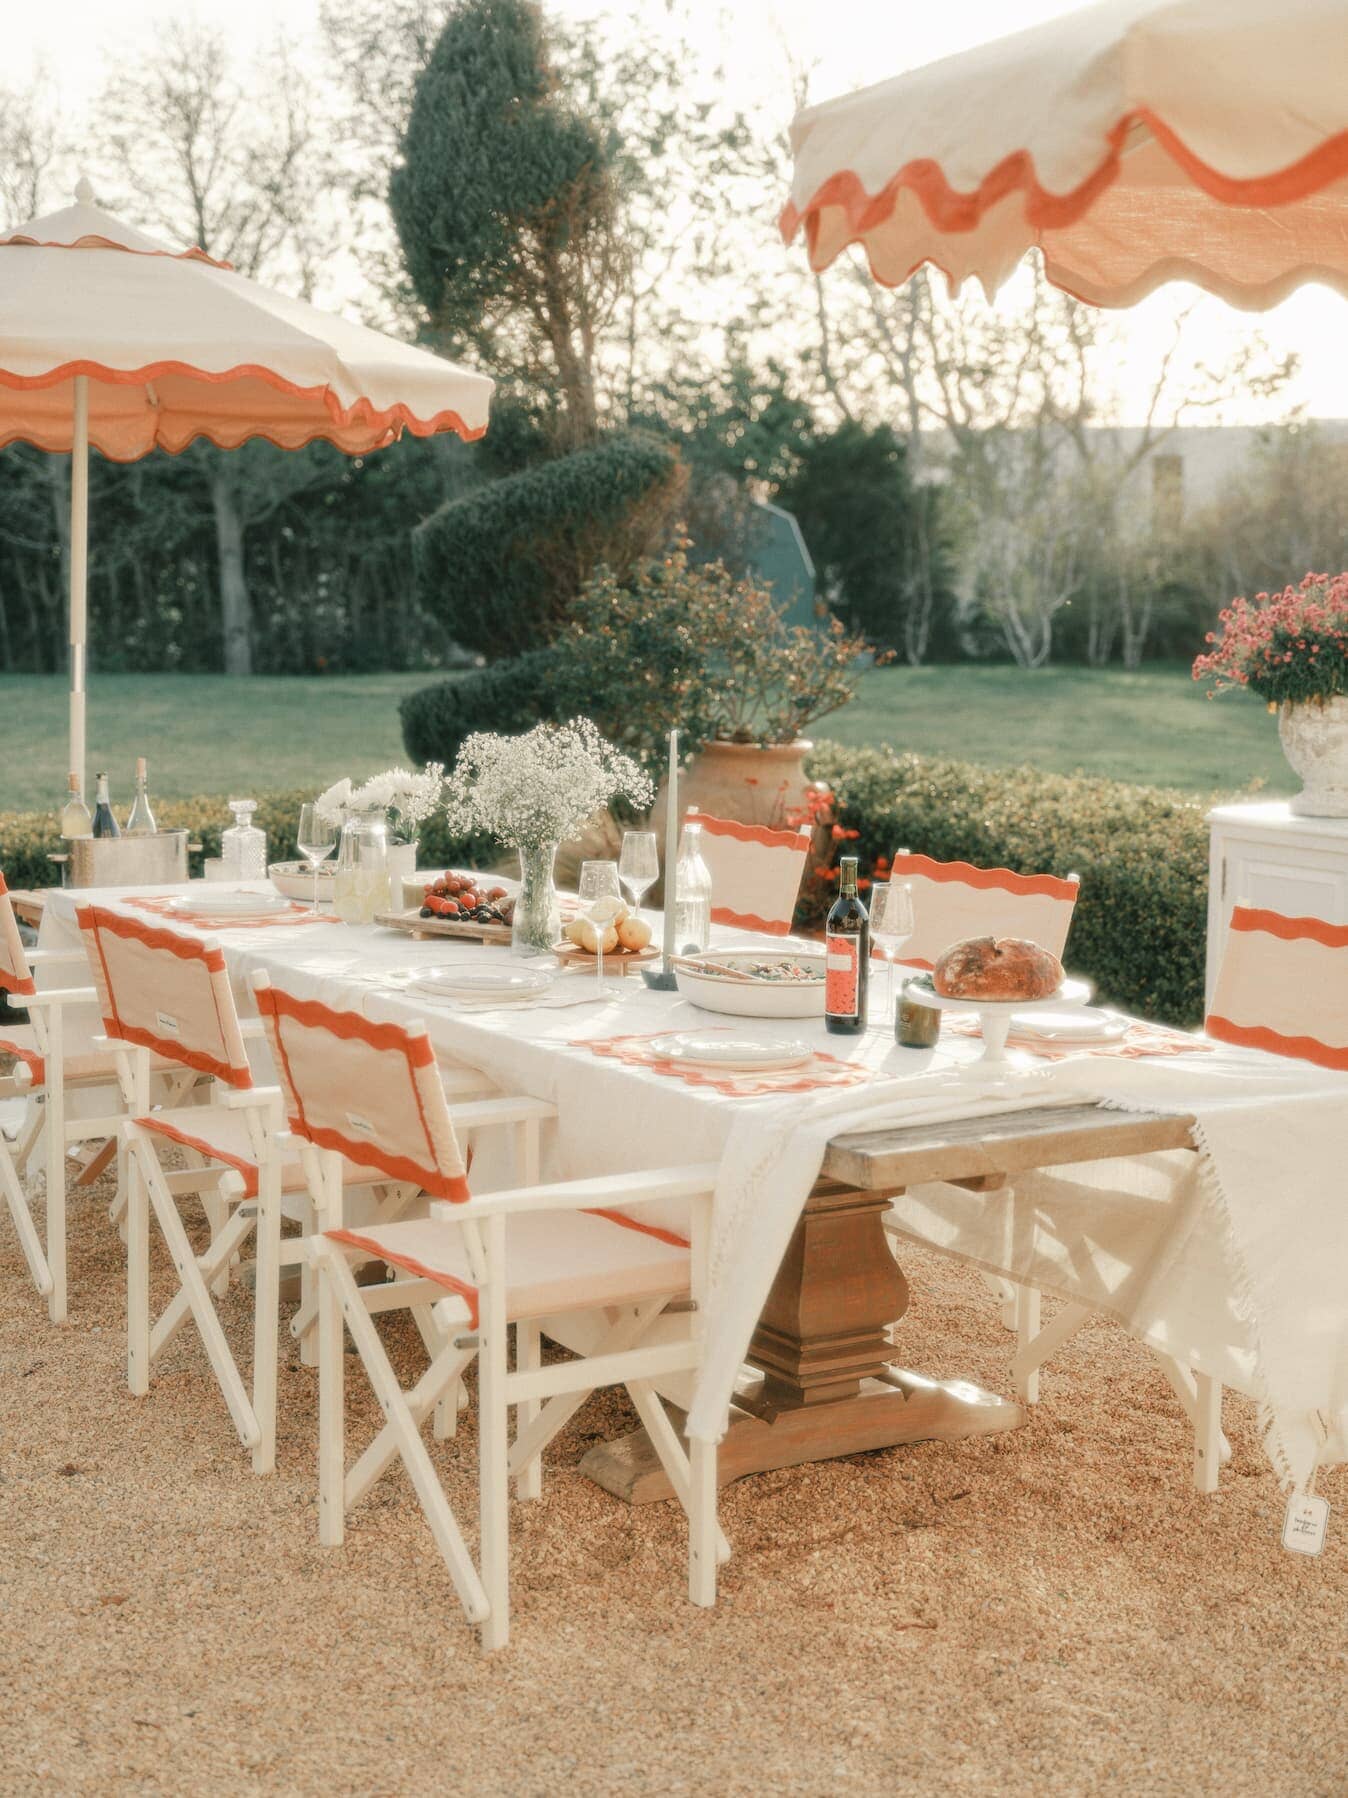 al fresco dining table with riviera pink directors chairs and market umbrellas